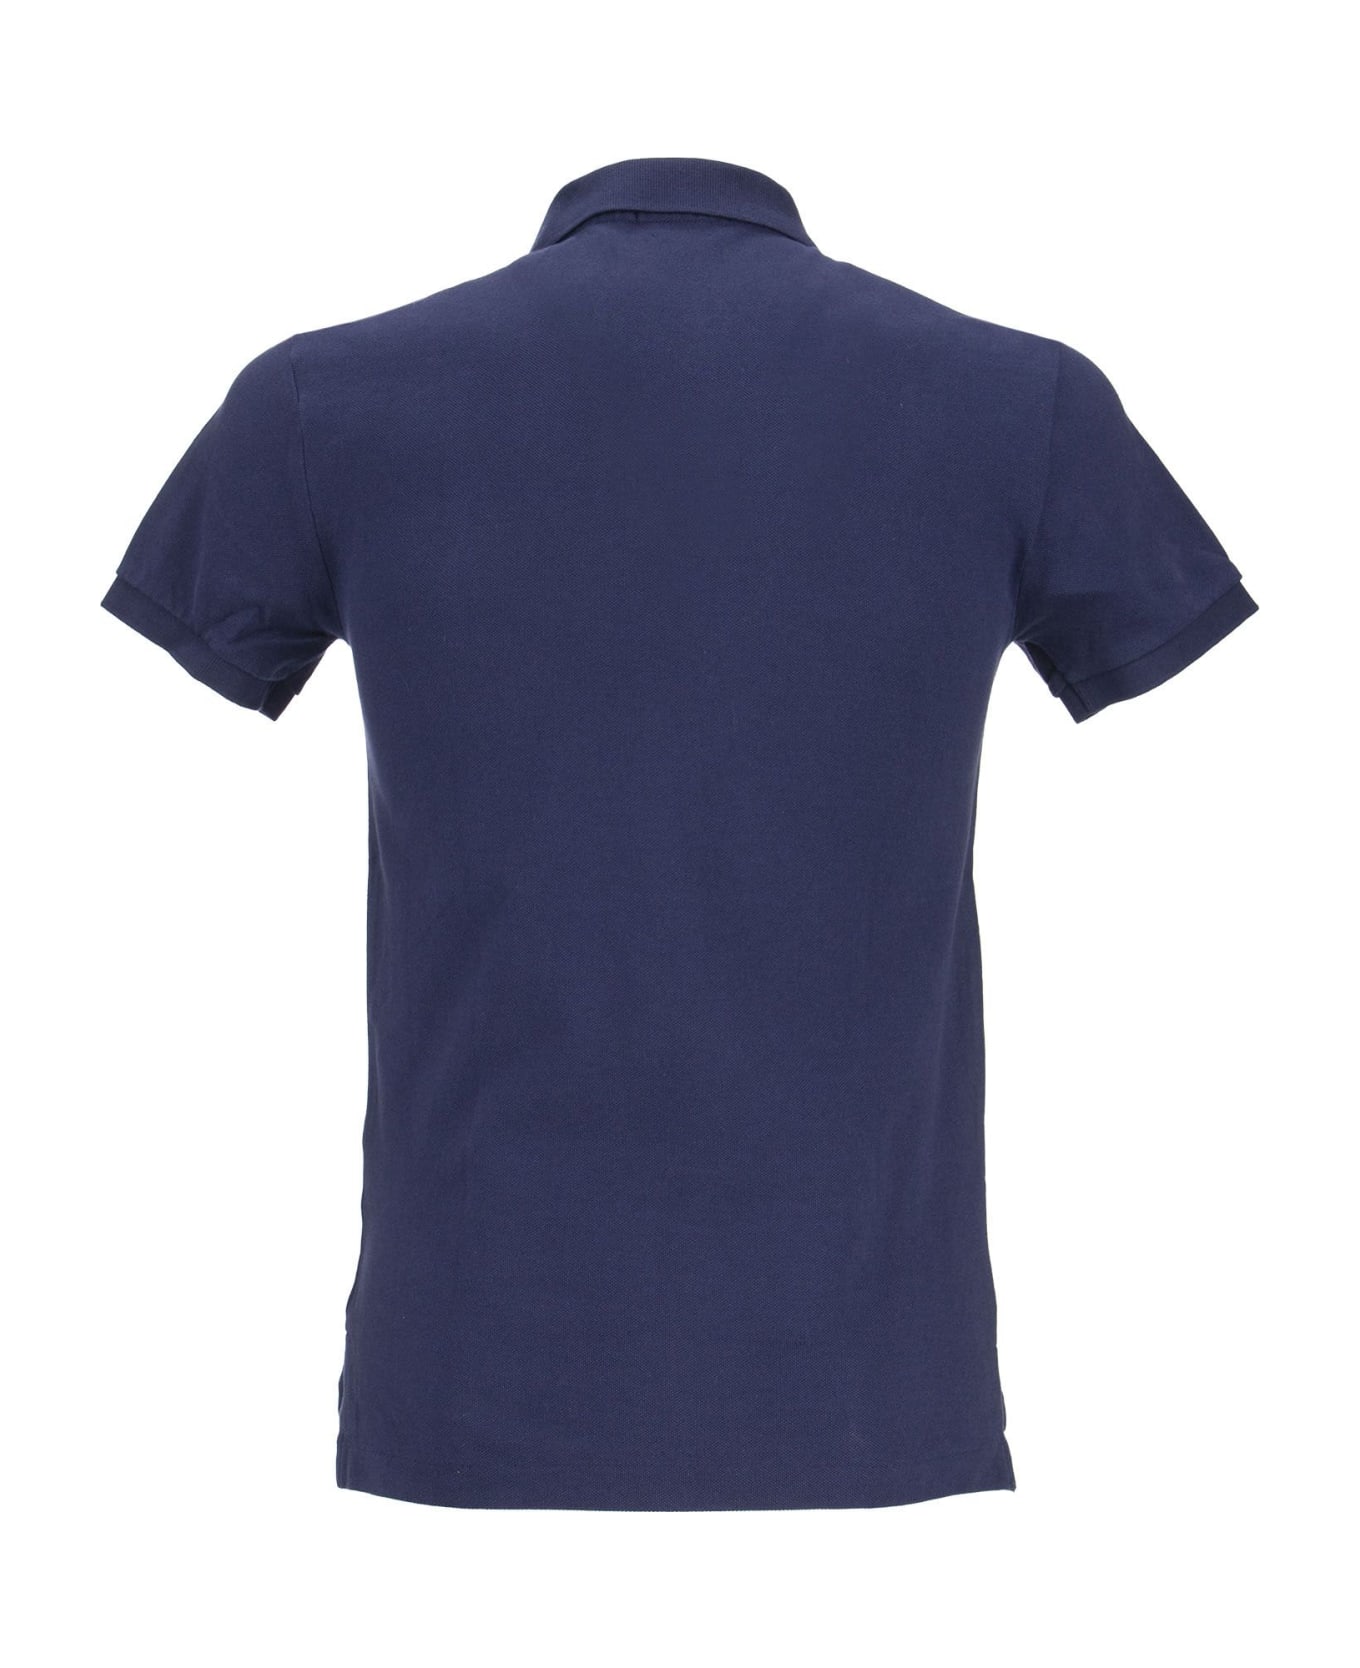 Ralph Lauren Navy Blue And Red Slim-fit Pique Polo Shirt - Blue ポロシャツ